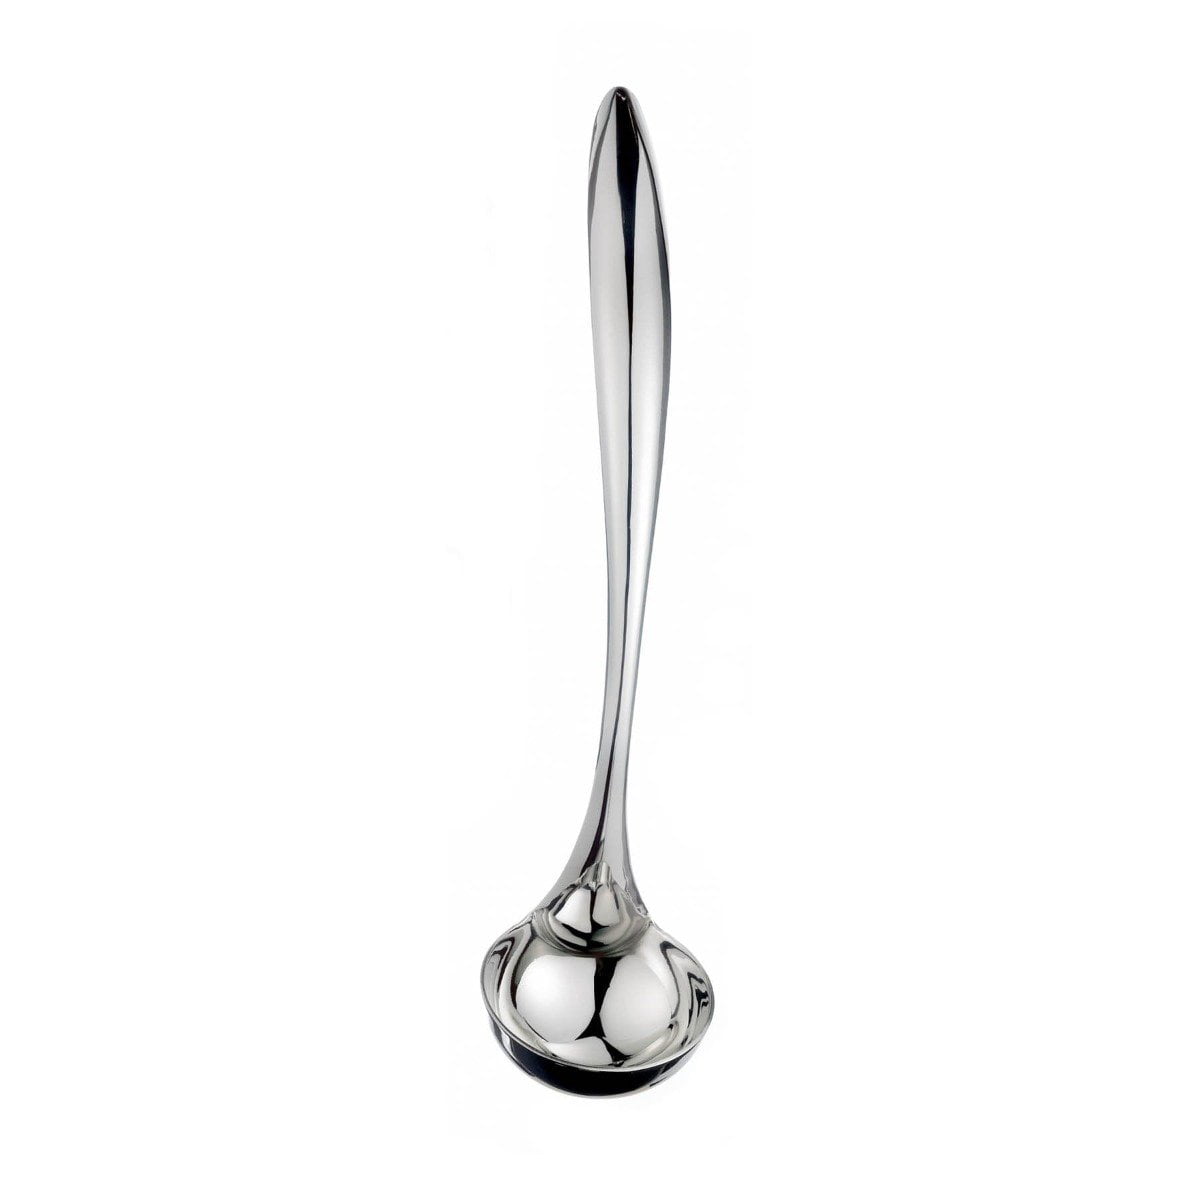 Norpro 1133 Stainless Steel Soup Ladle 12.5-Inch Silver 